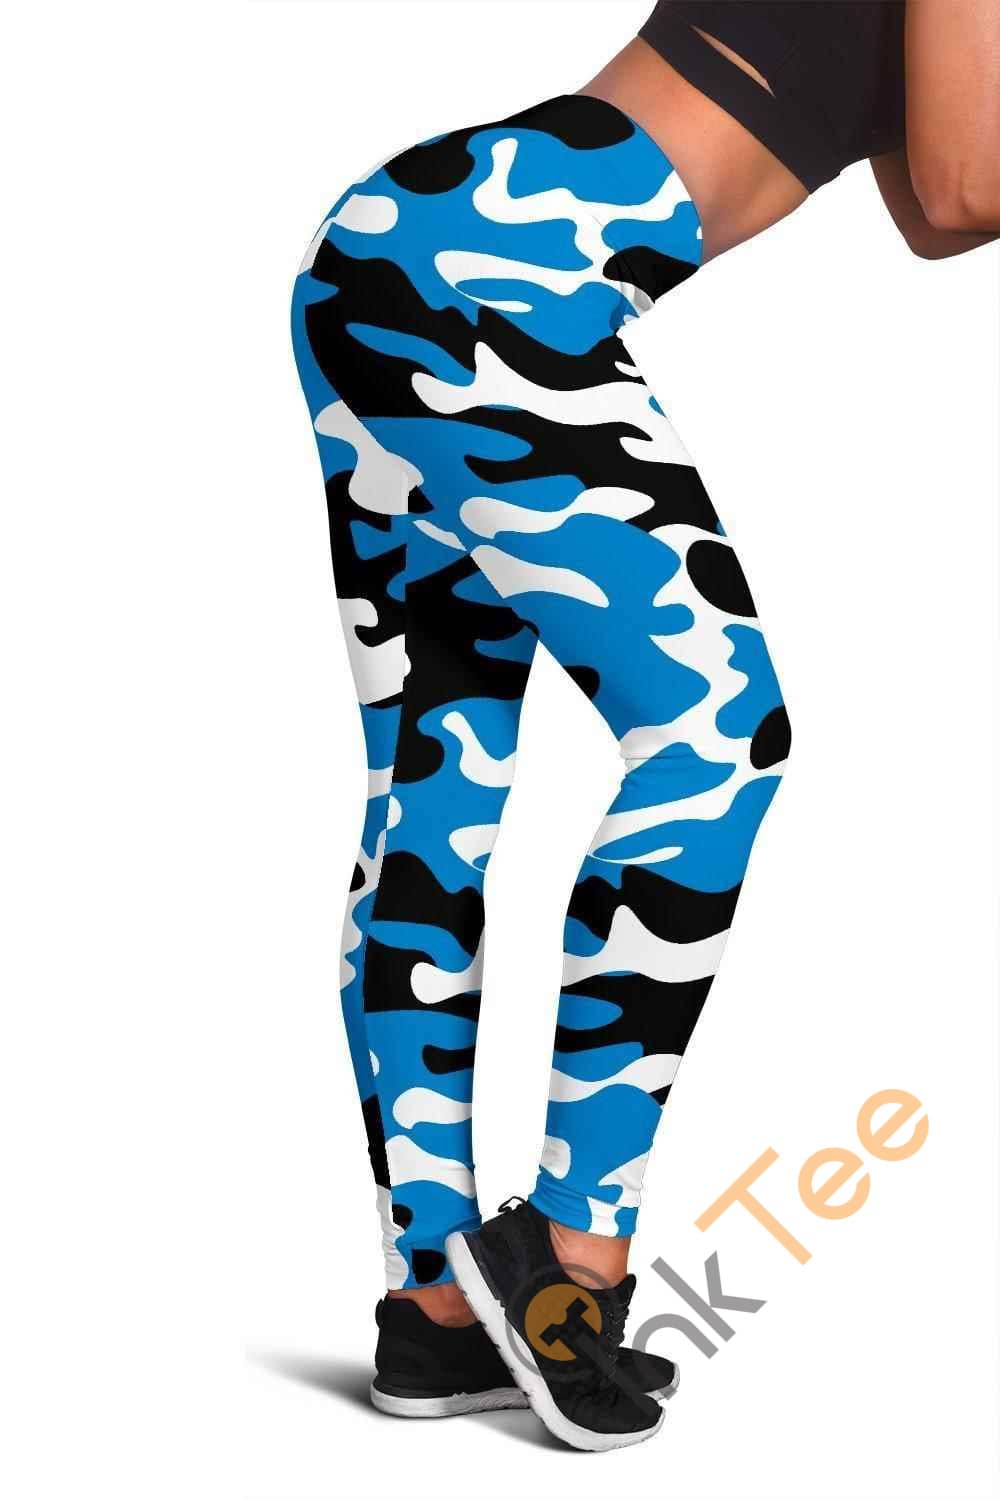 Inktee Store - Carolina Panthers Inspired Tru Camo 3D All Over Print For Yoga Fitness Fashion Women'S Leggings Image